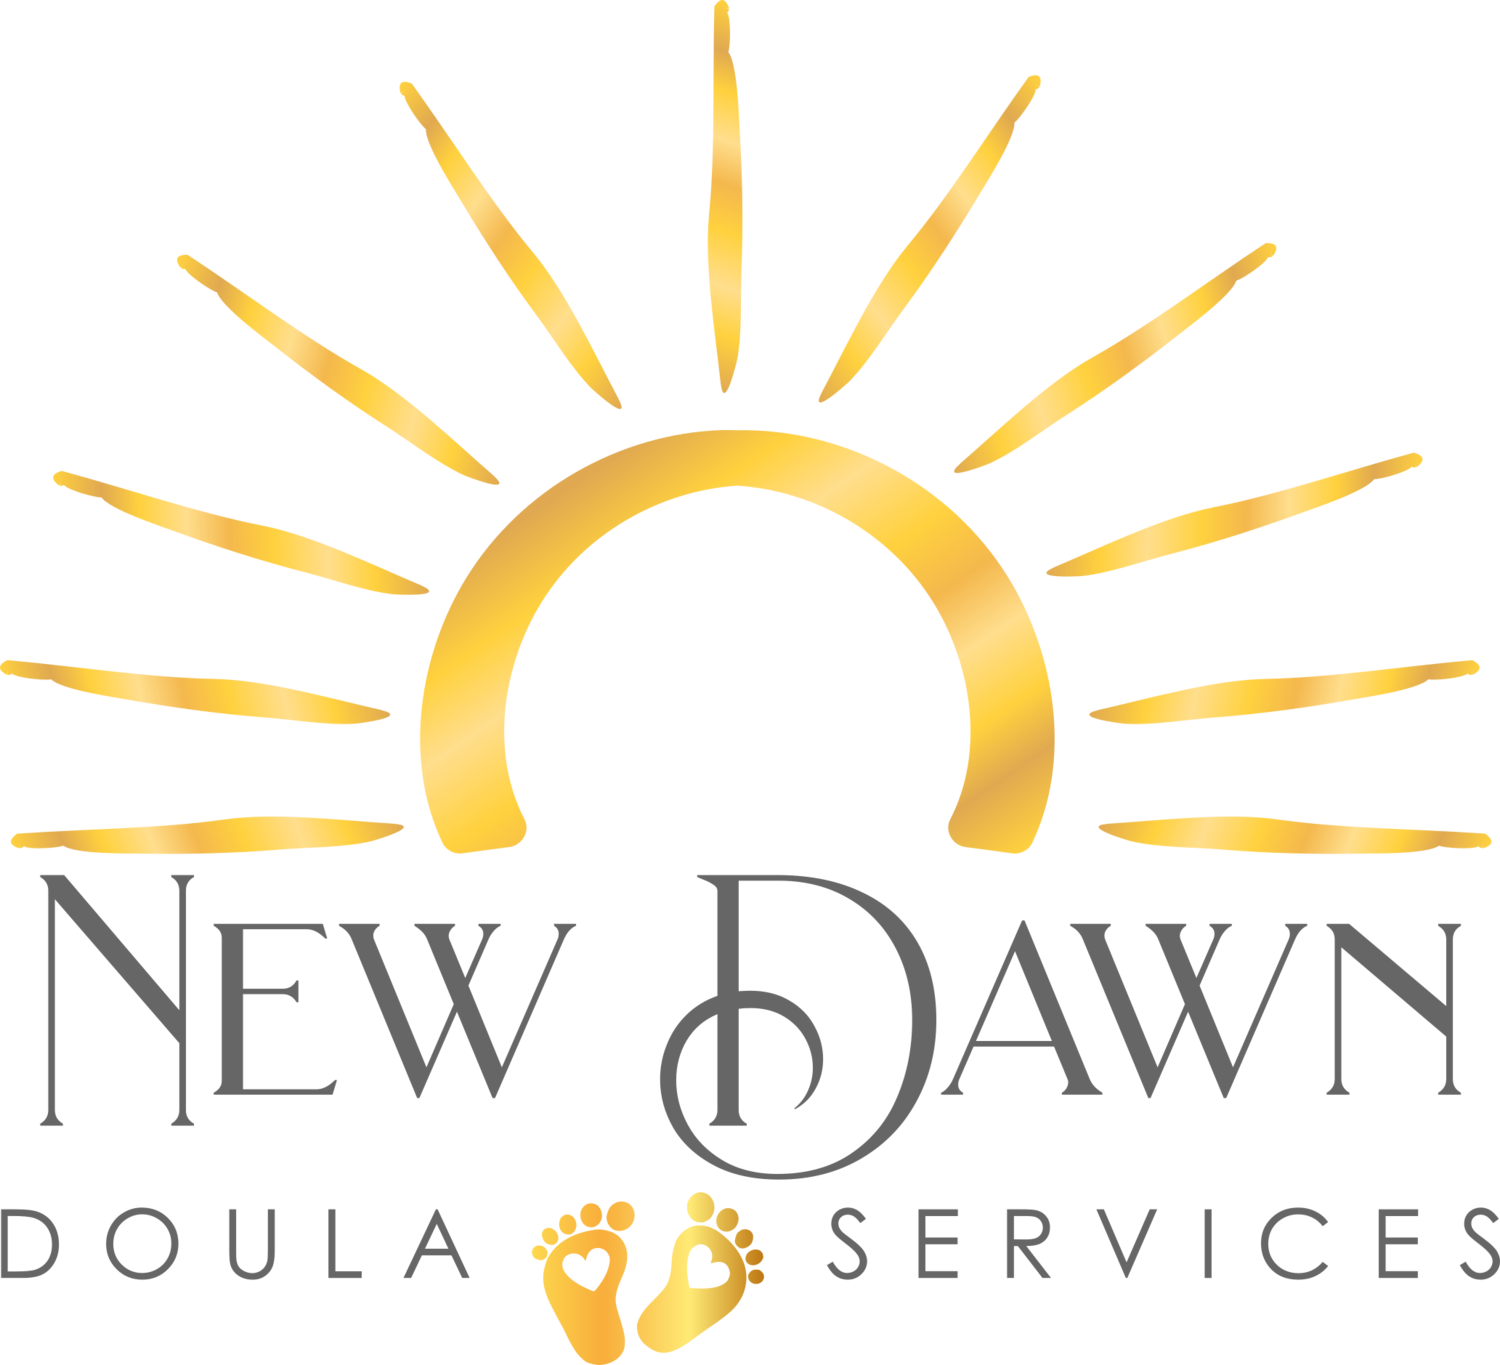 New Dawn Doula Services